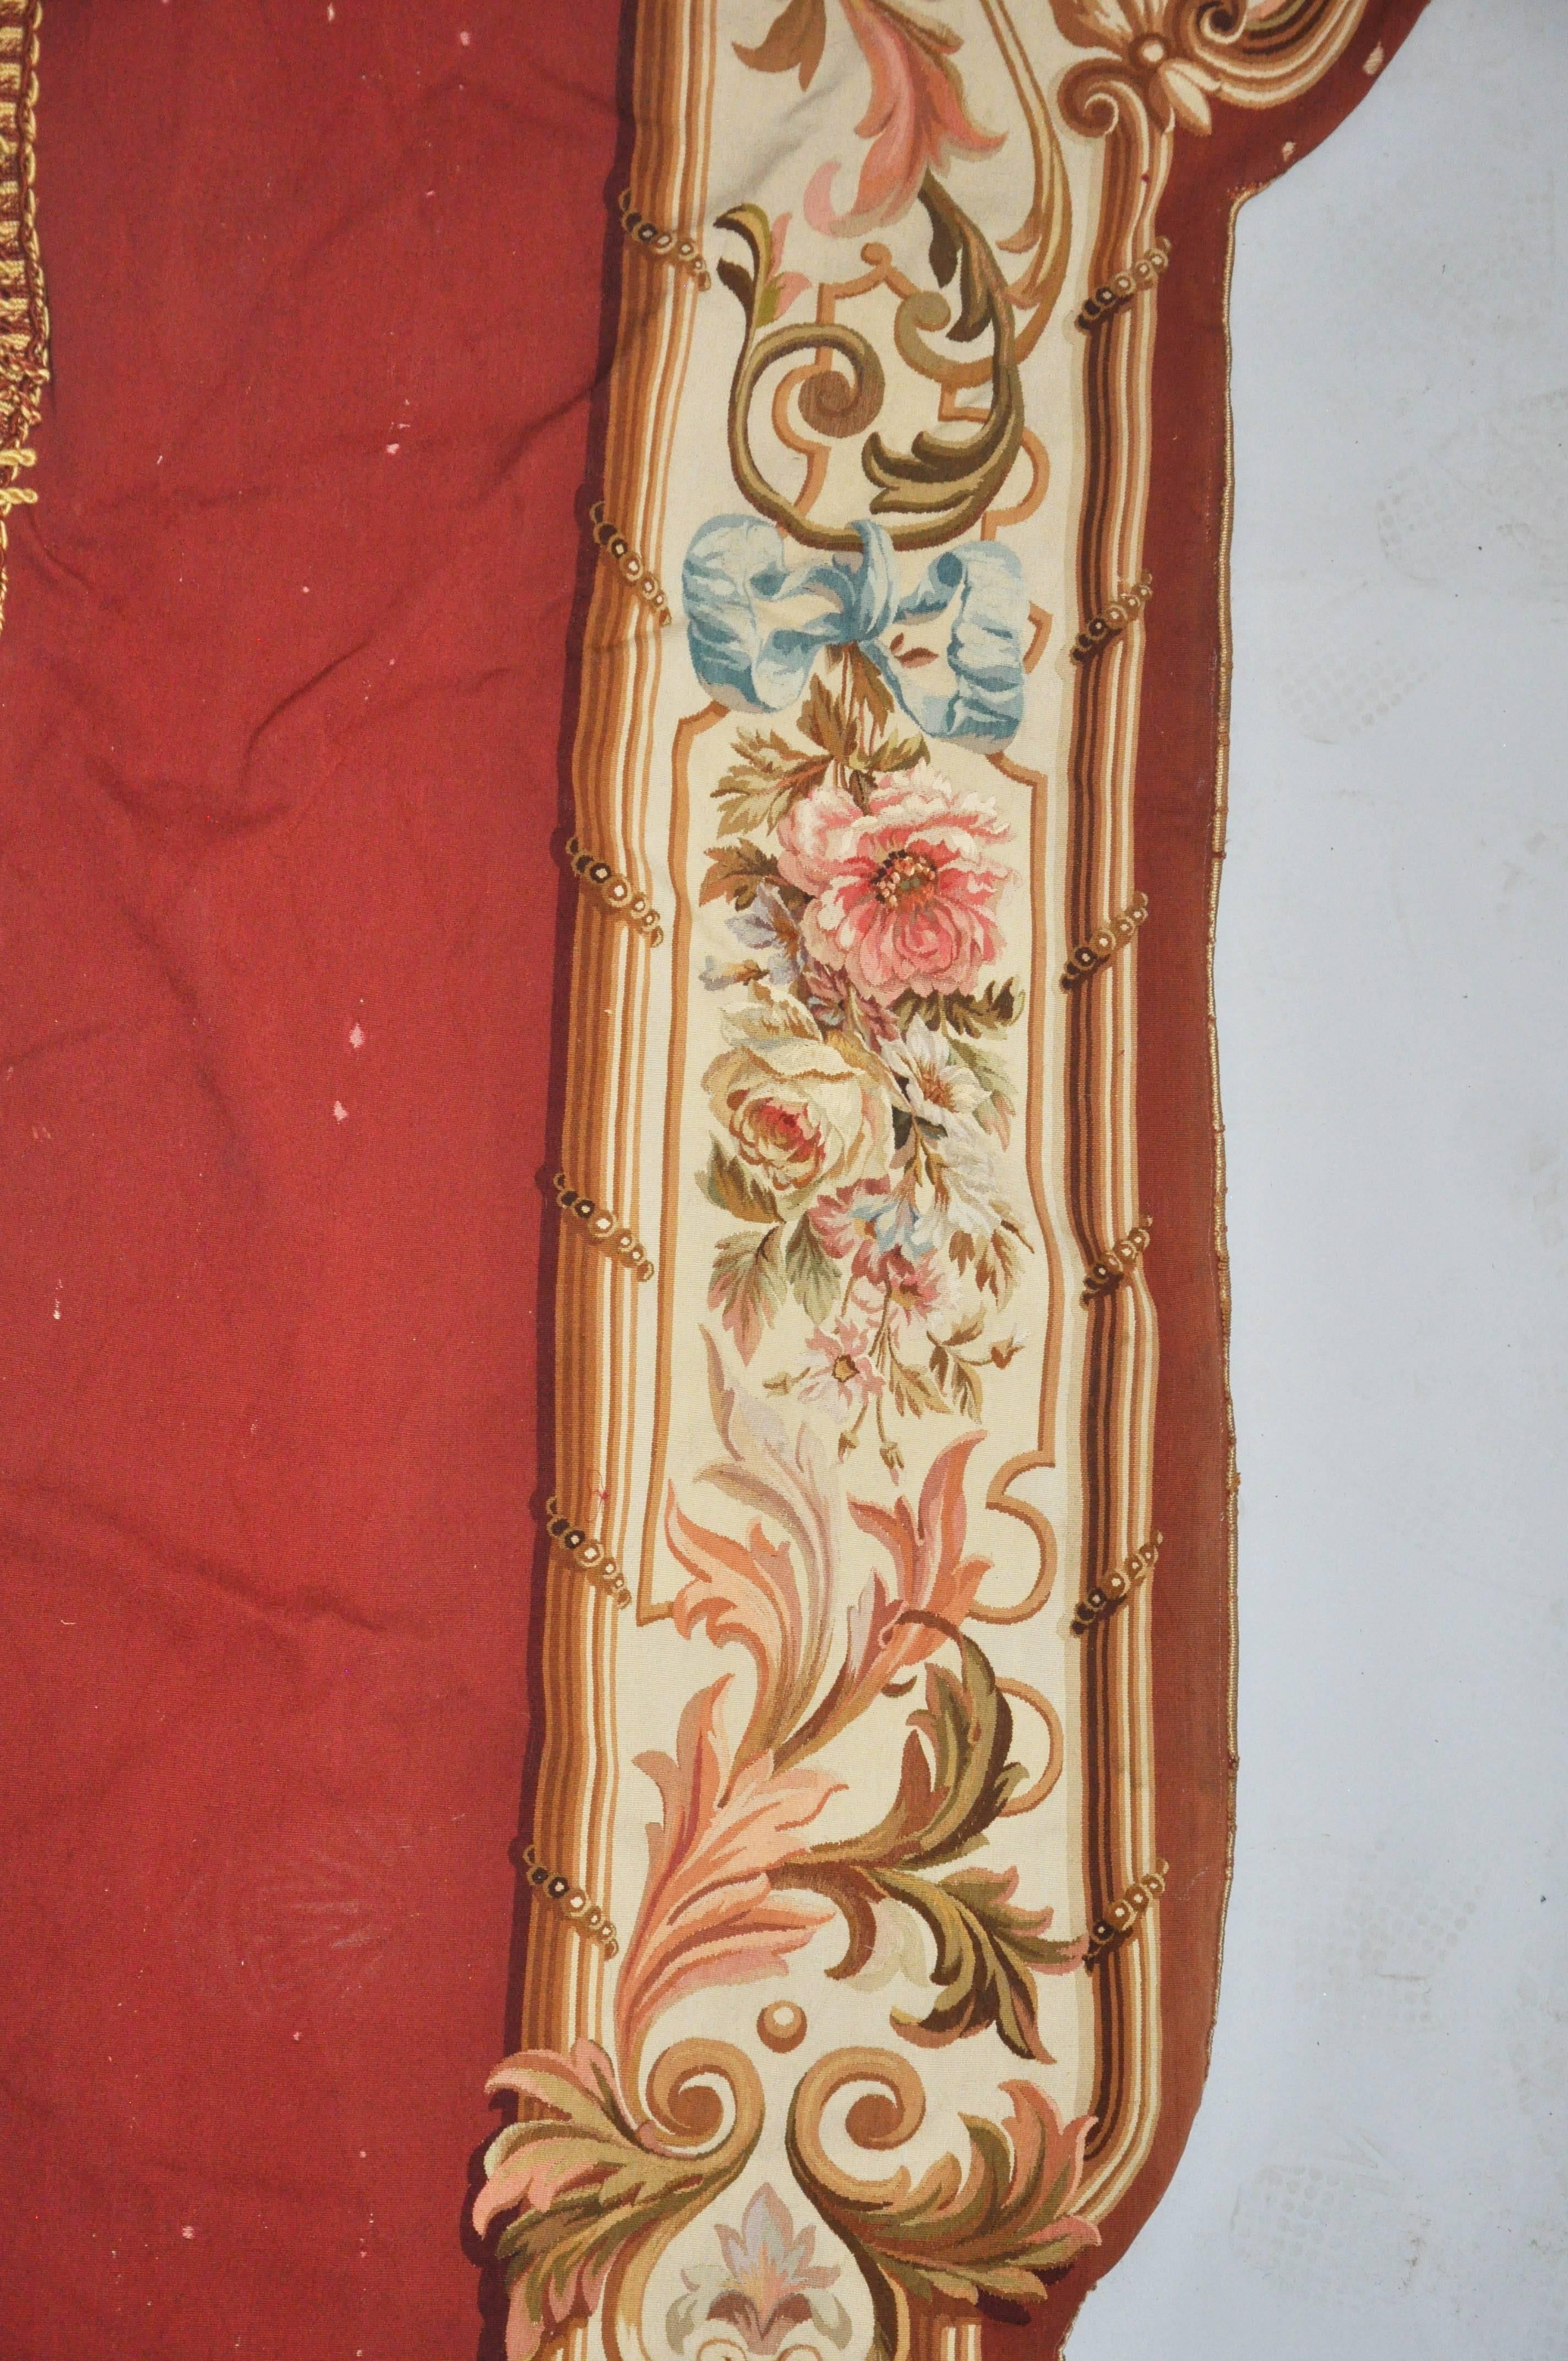 19th Century French Palatial Savonnière Needlepoint Wall Hanging. Portico (door opening) shaped opening, red silk background with shapely opening with creamy field with trailing pink and white floral, gold scrolling and design, blue ribbons, silk